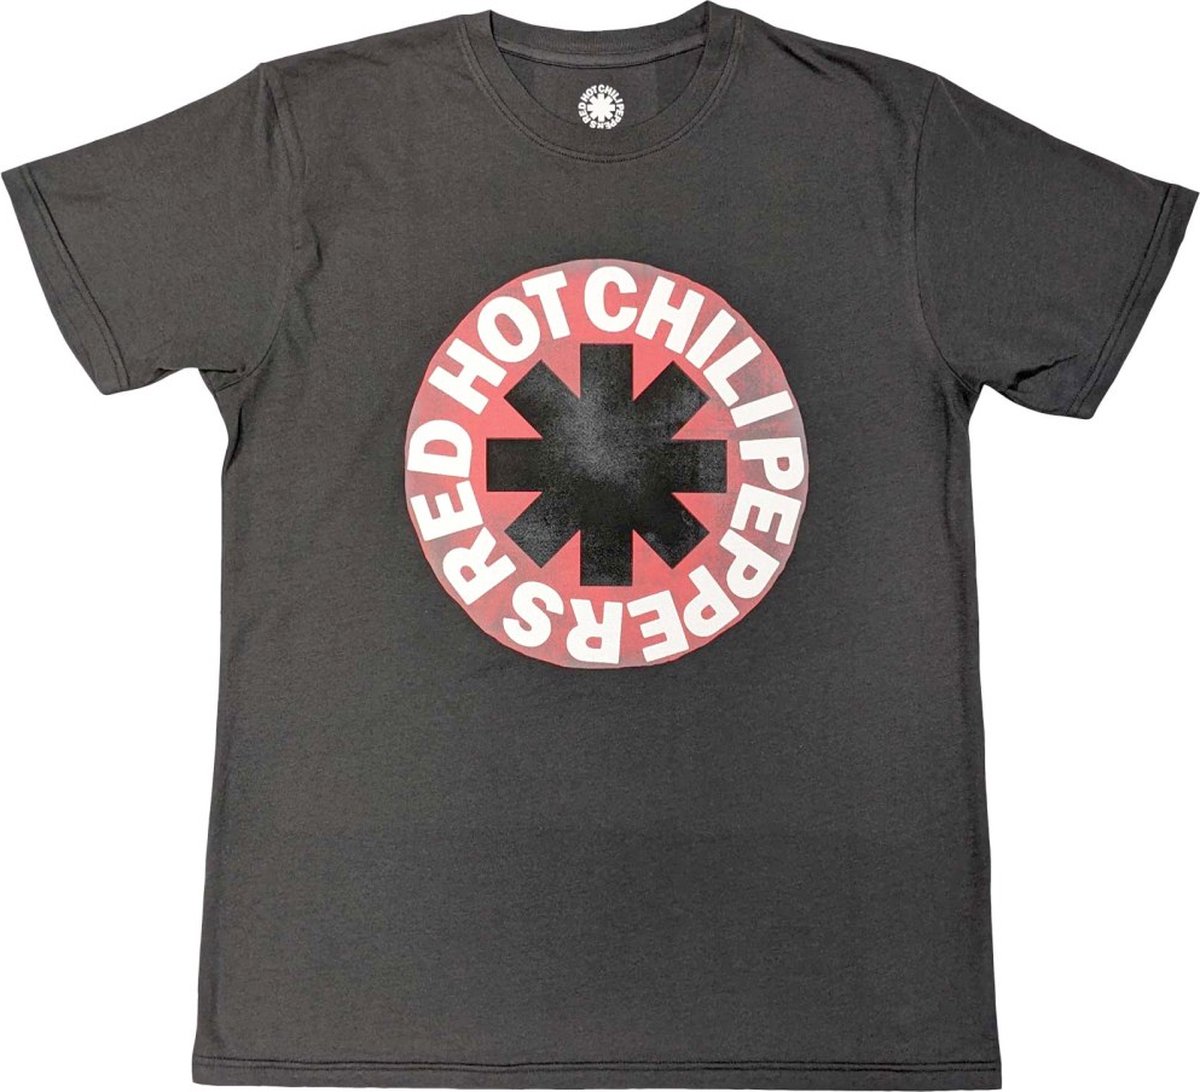 Red Hot Chili Peppers - Red Circle Asterisk Heren T-shirt - S - Grijs